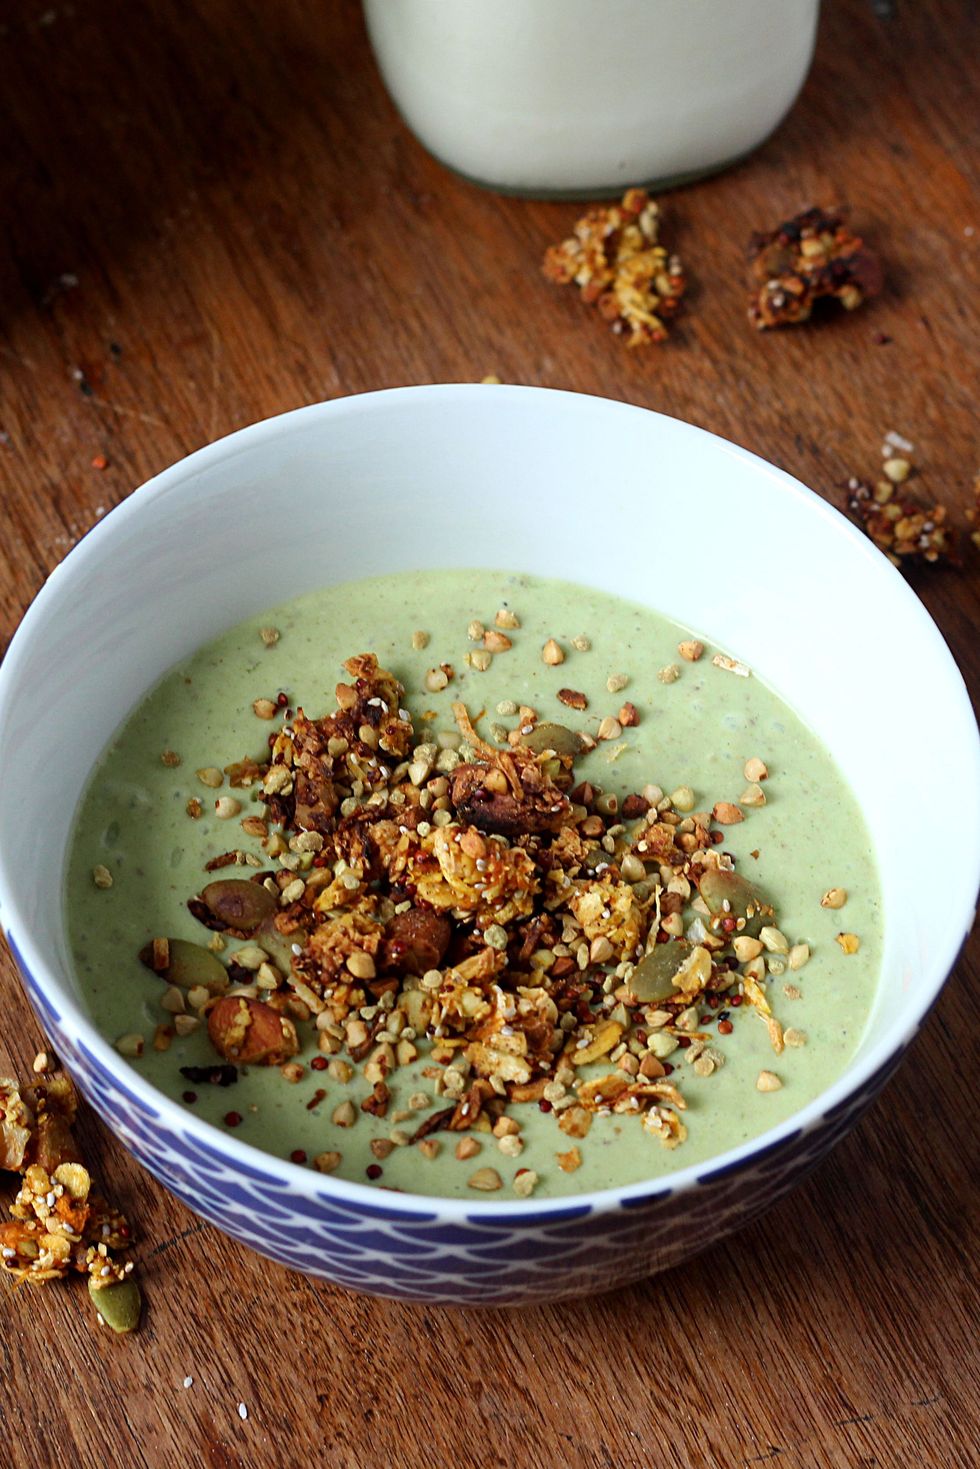 https://hips.hearstapps.com/hmg-prod/images/green-smoothie-bowl-3-to-her-core1-1440690678.jpg?crop=0.667xw:1xh;center,top&resize=980:*